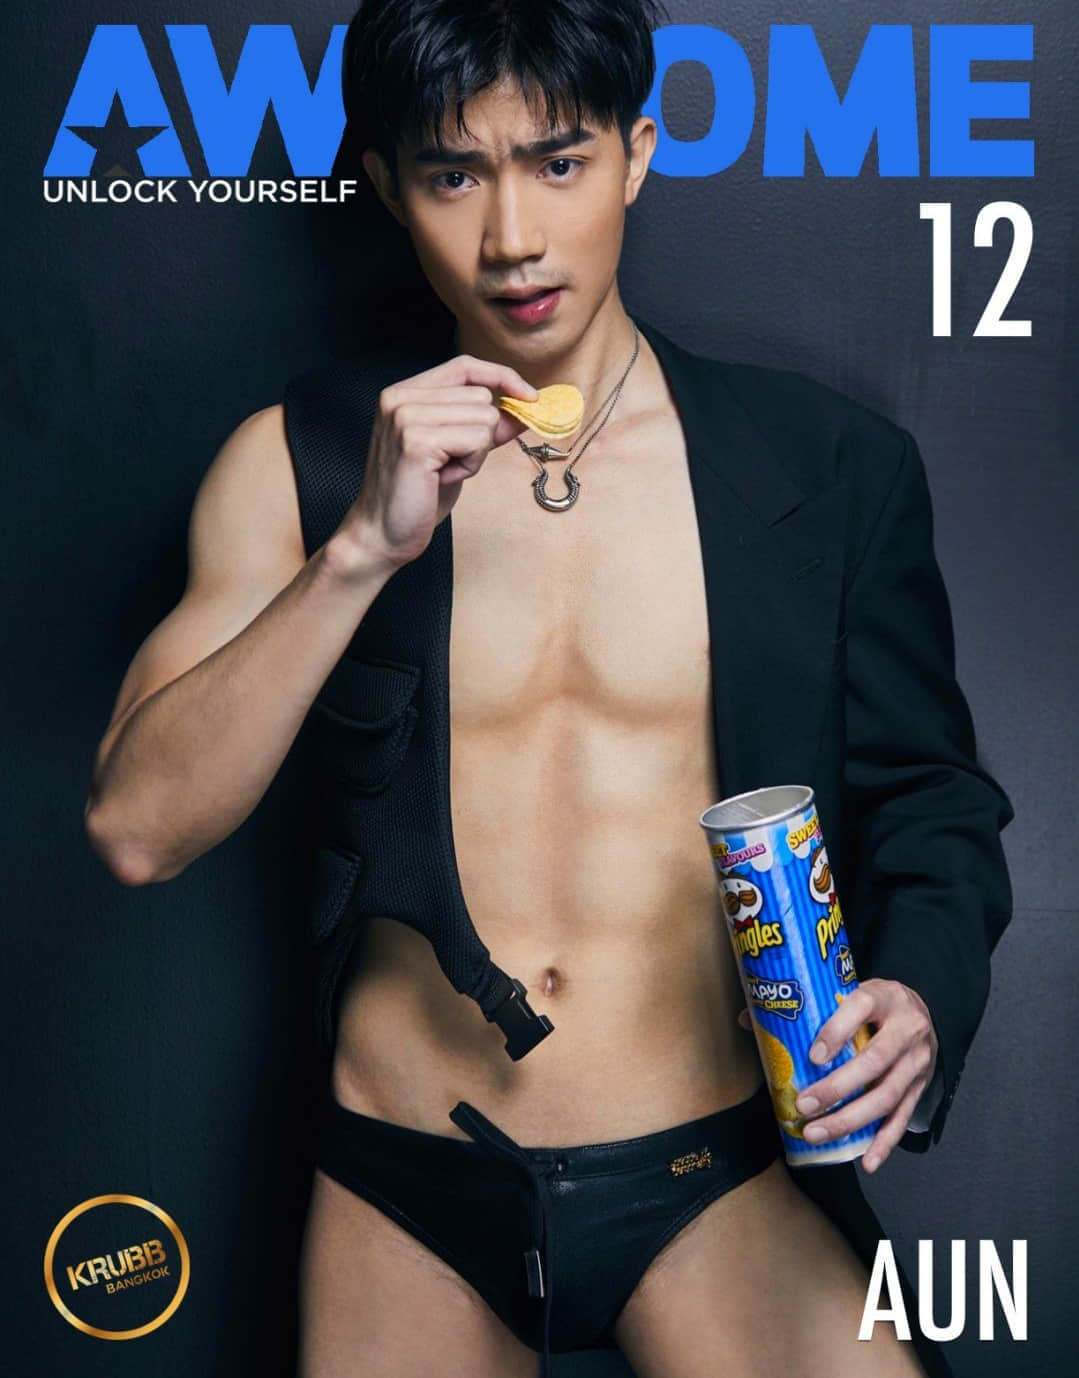 Awesome 12 | Aun (ebook + video)-NICEGAY